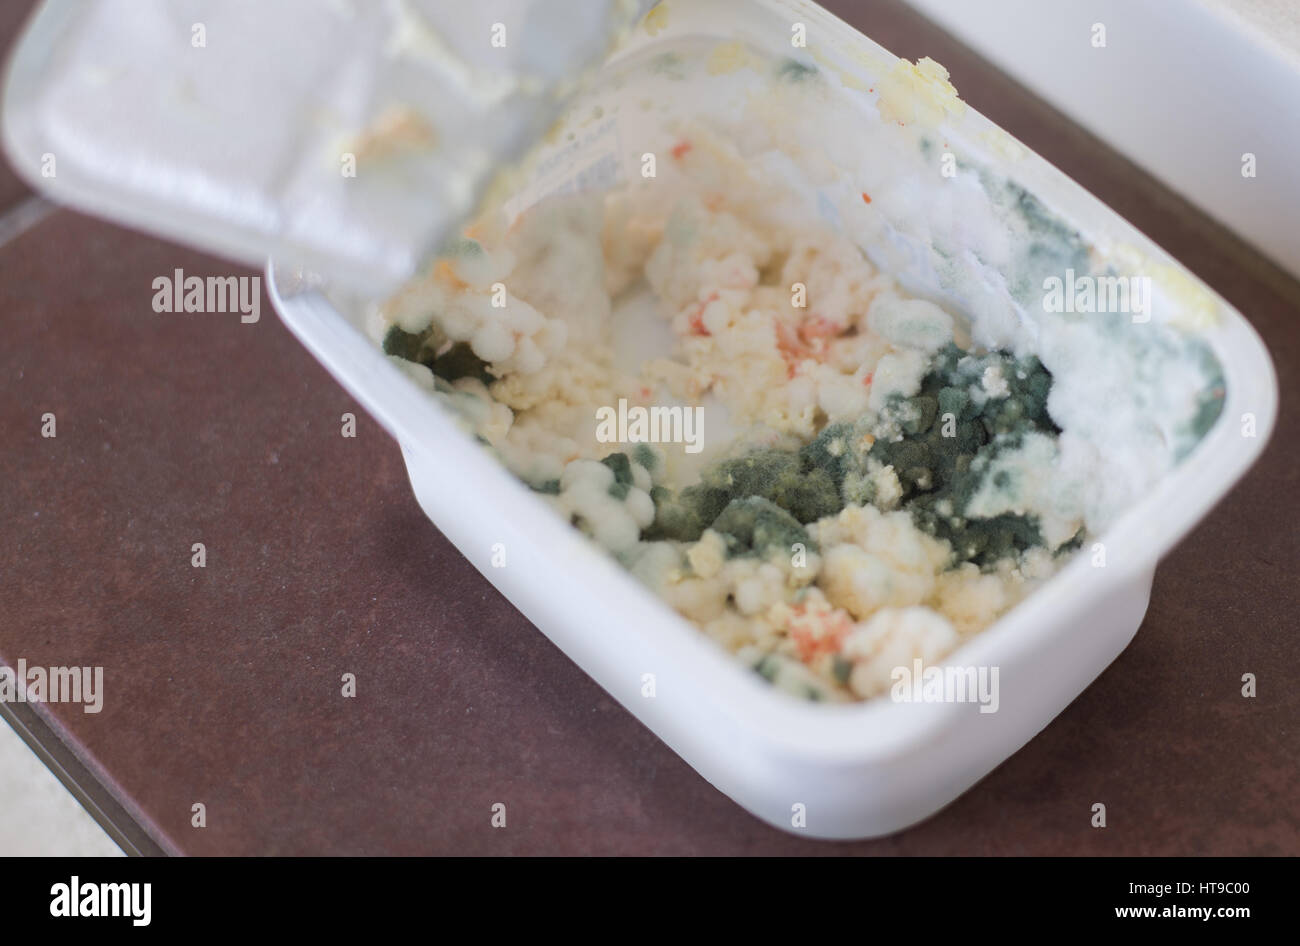 Close Up On Rotten Butter Or Cottage Cheese Stock Photo 135431296